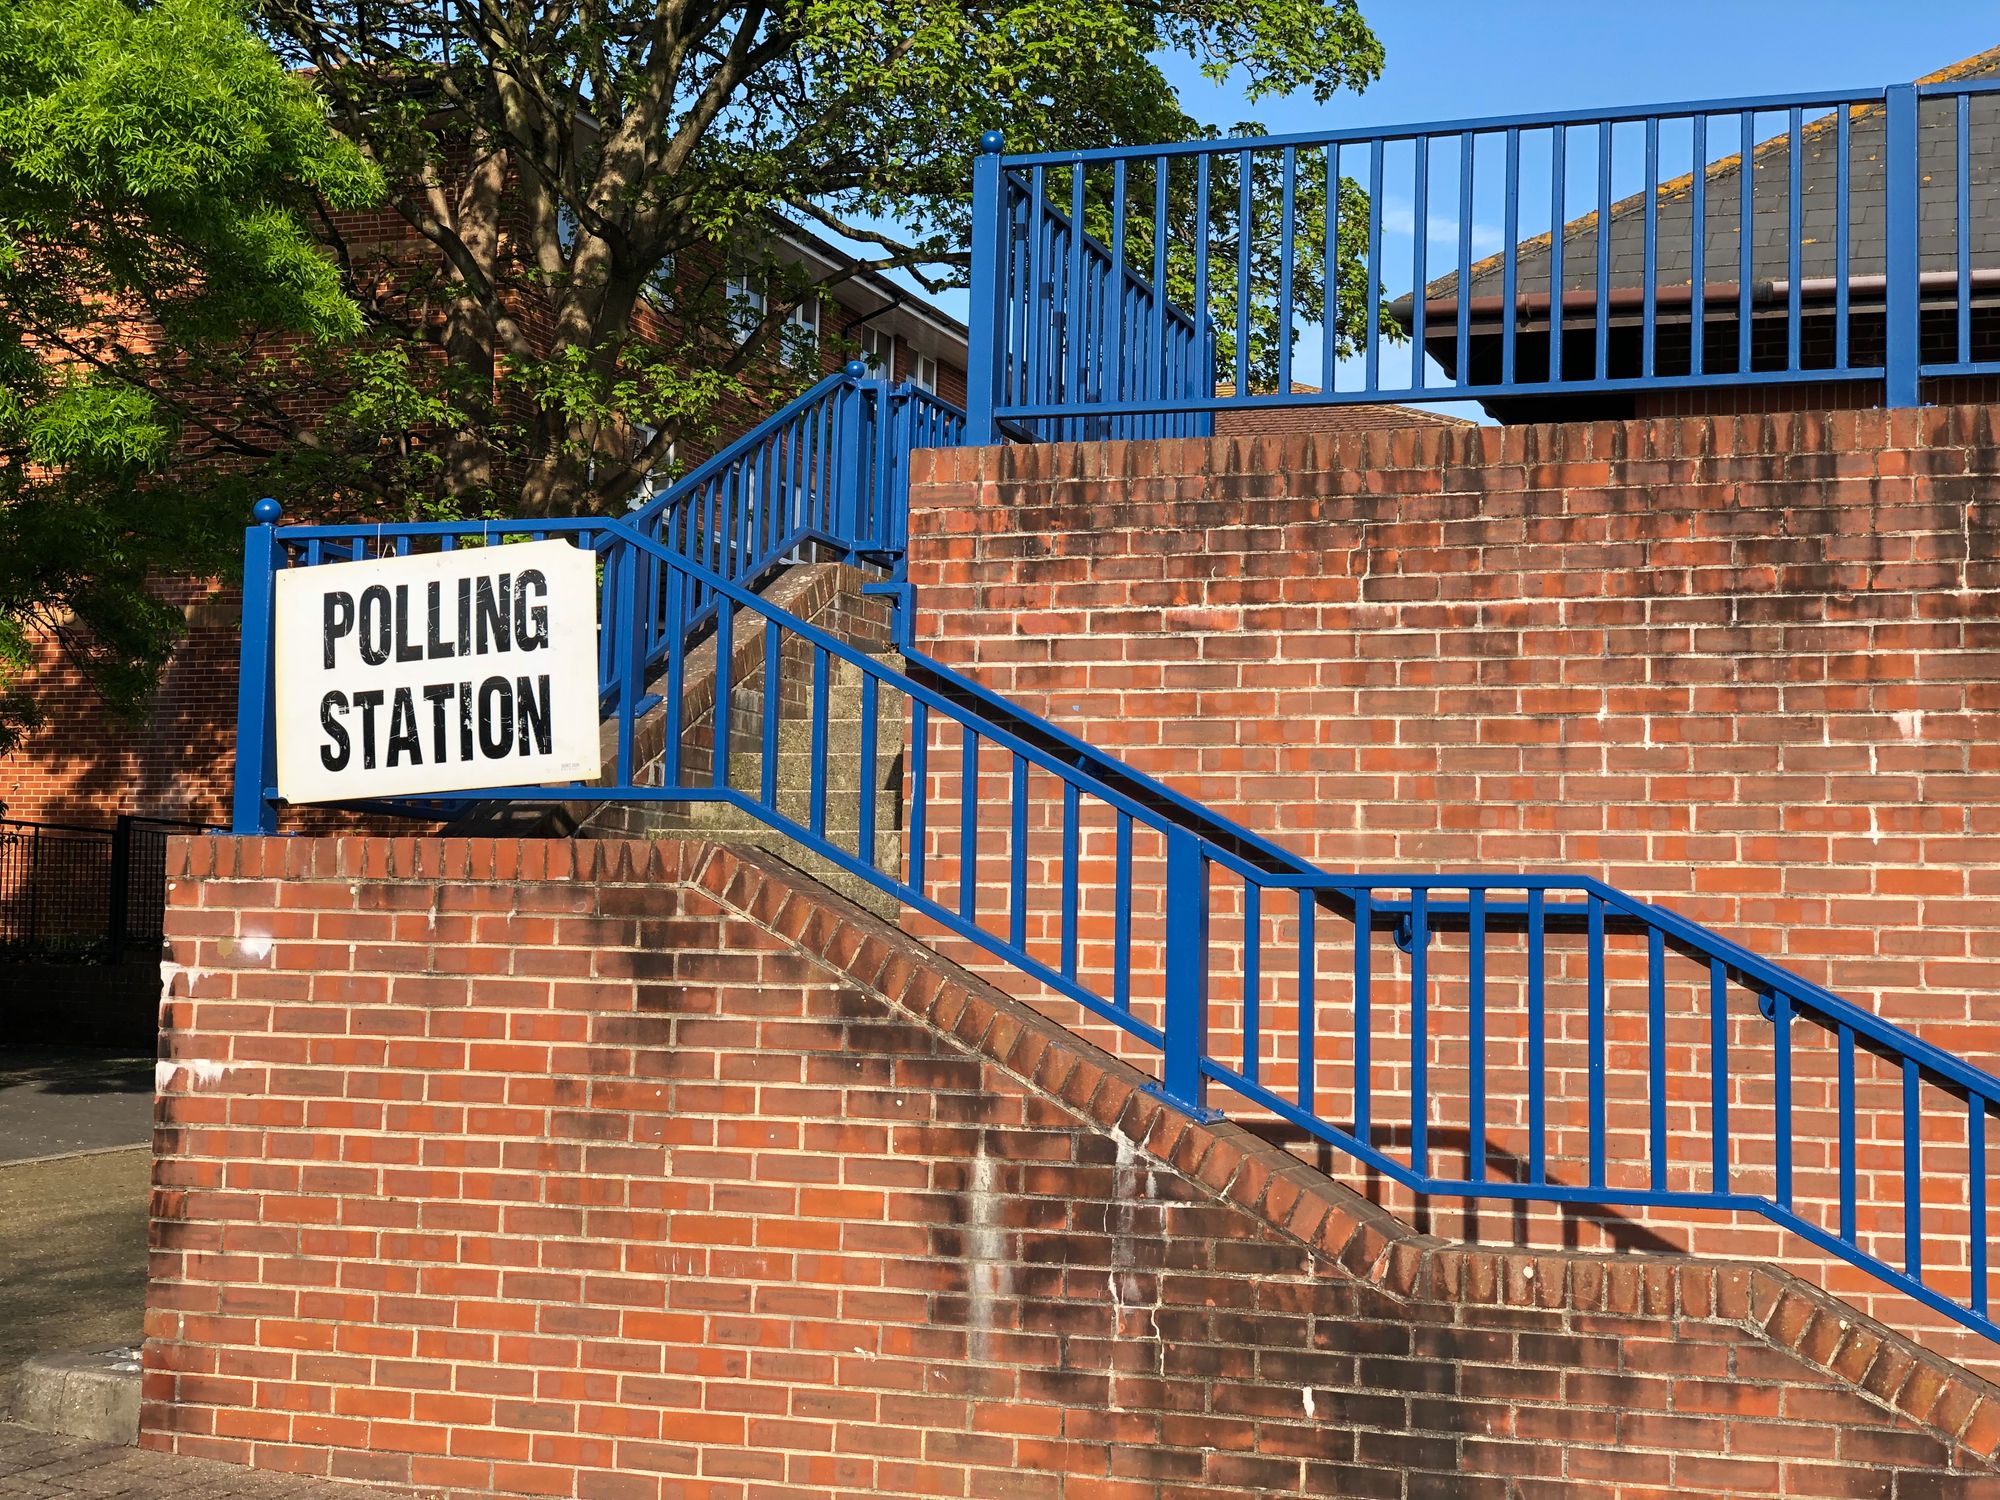 Picture of a polling station sign